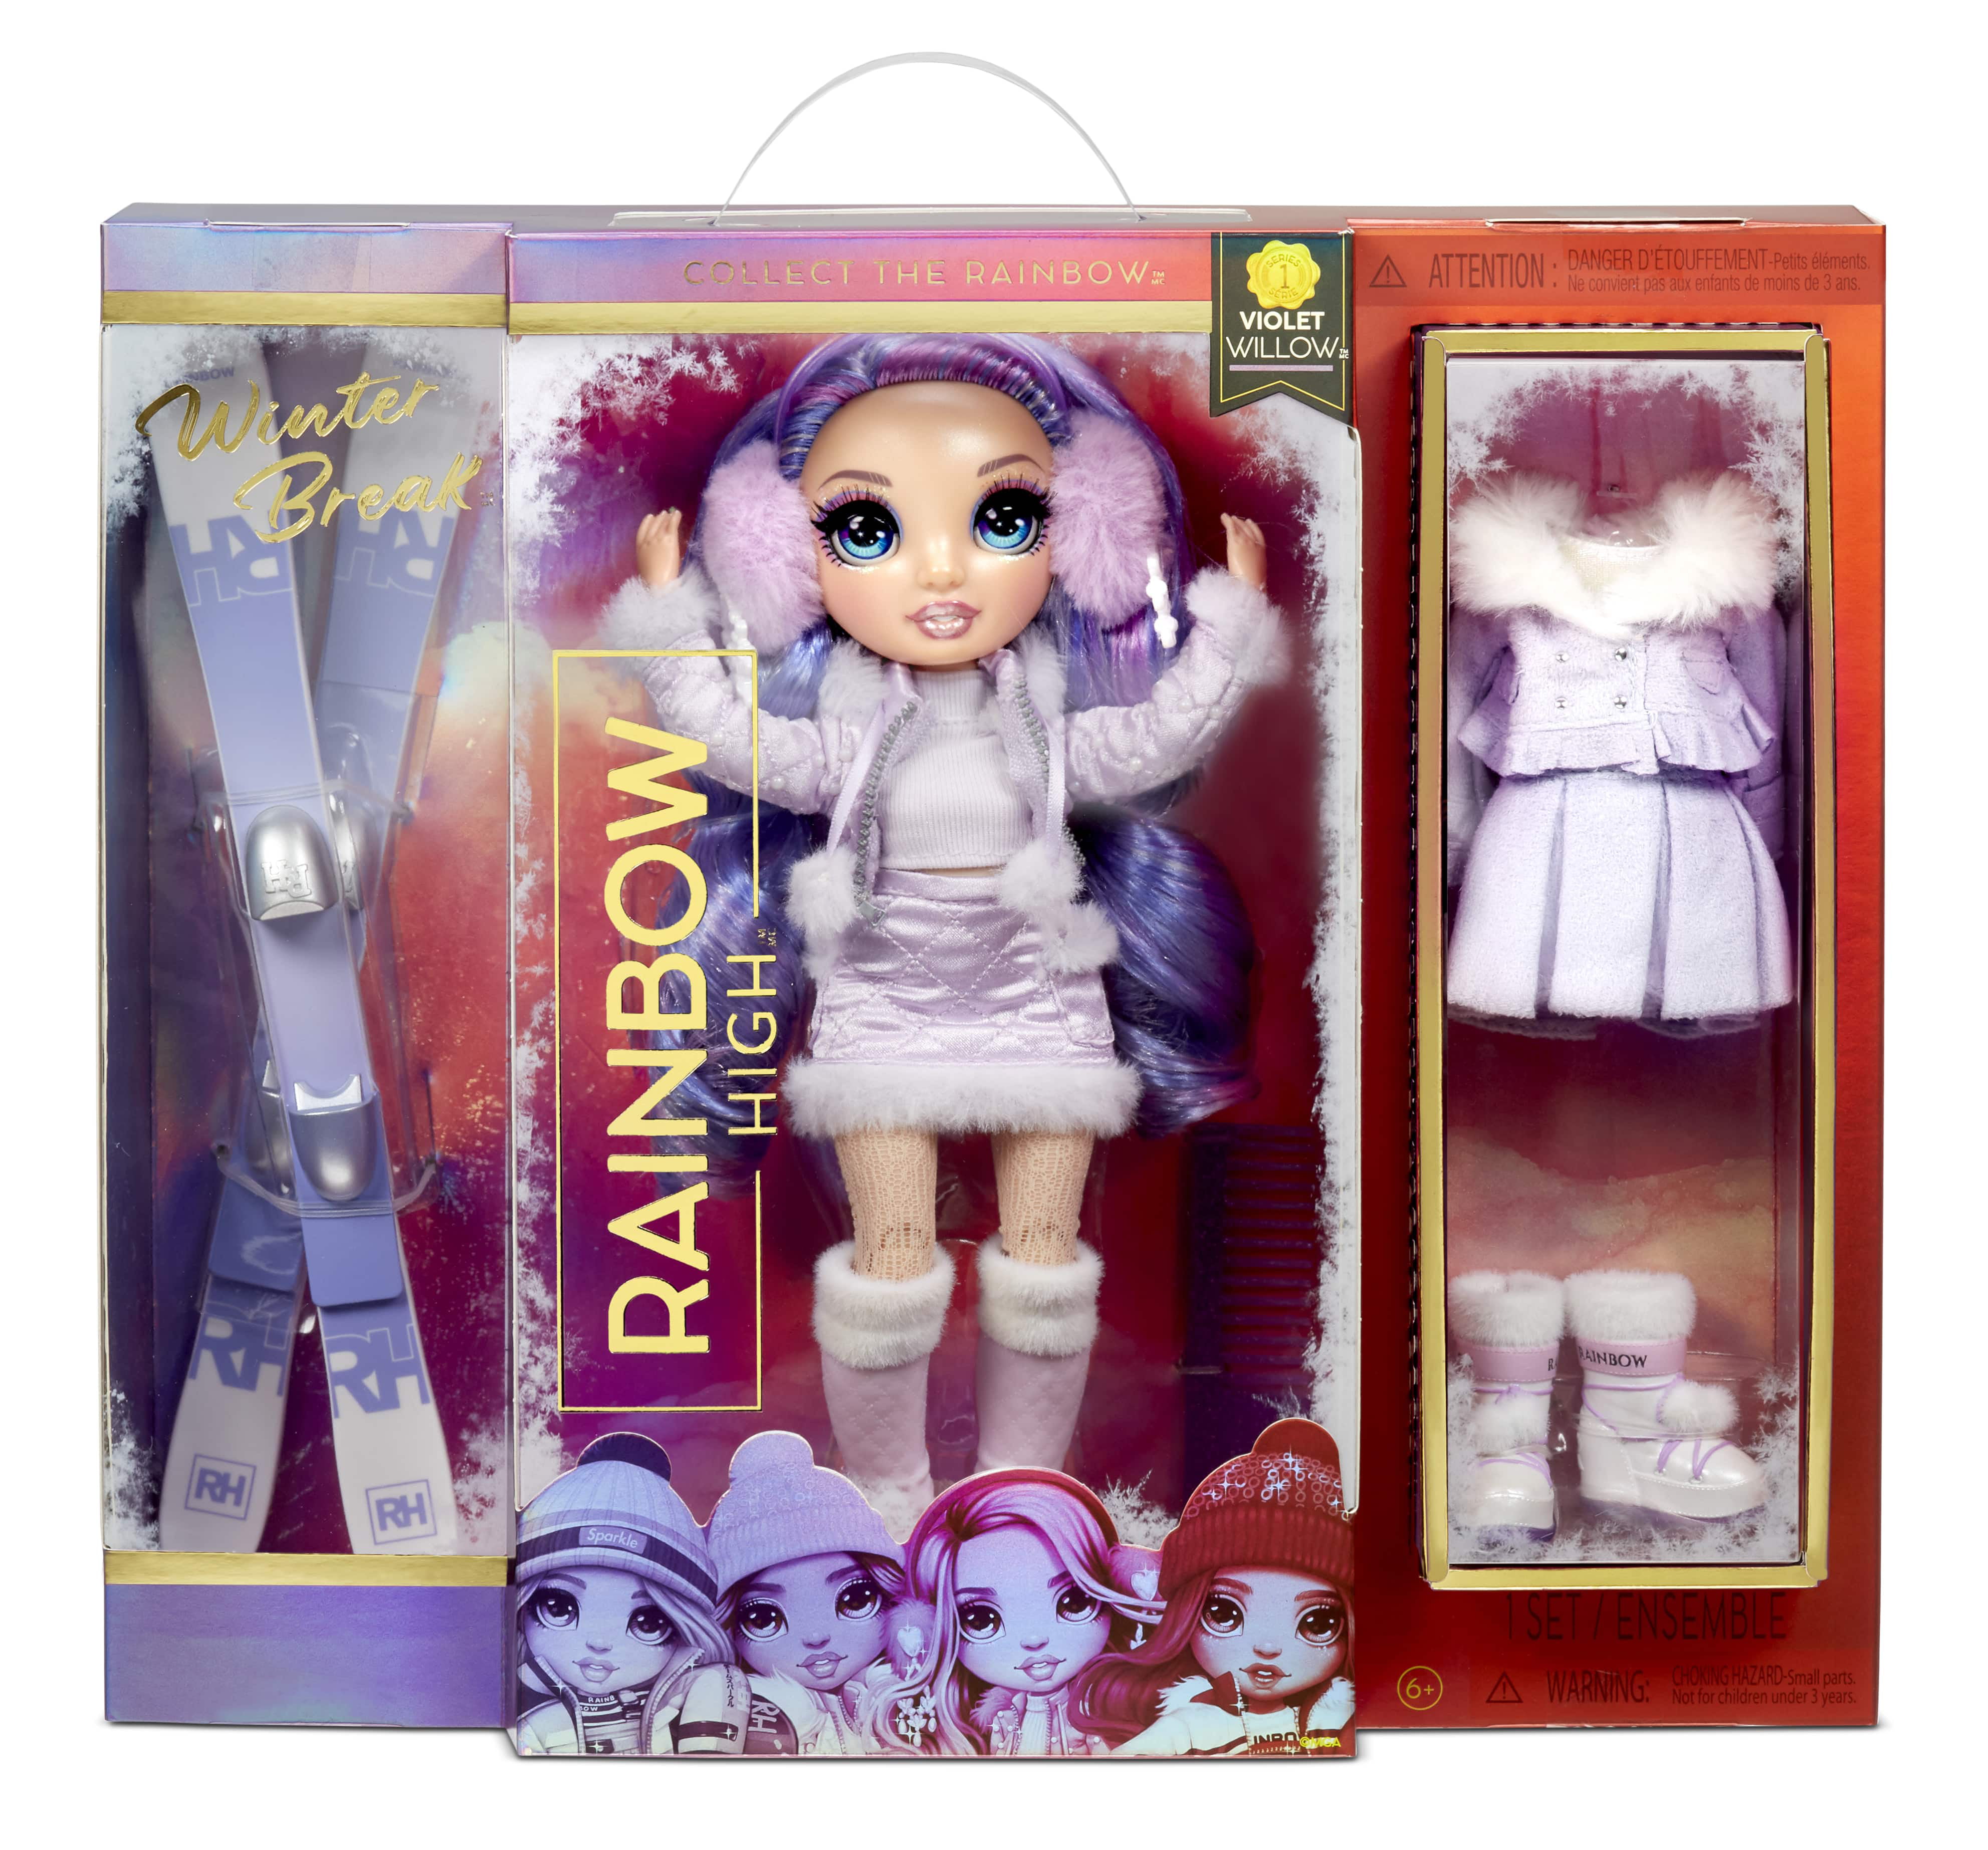 PEACH Fashion Doll with 2 Outfits Details about   Rainbow High Doll POPPY ROWAN Ages 3+